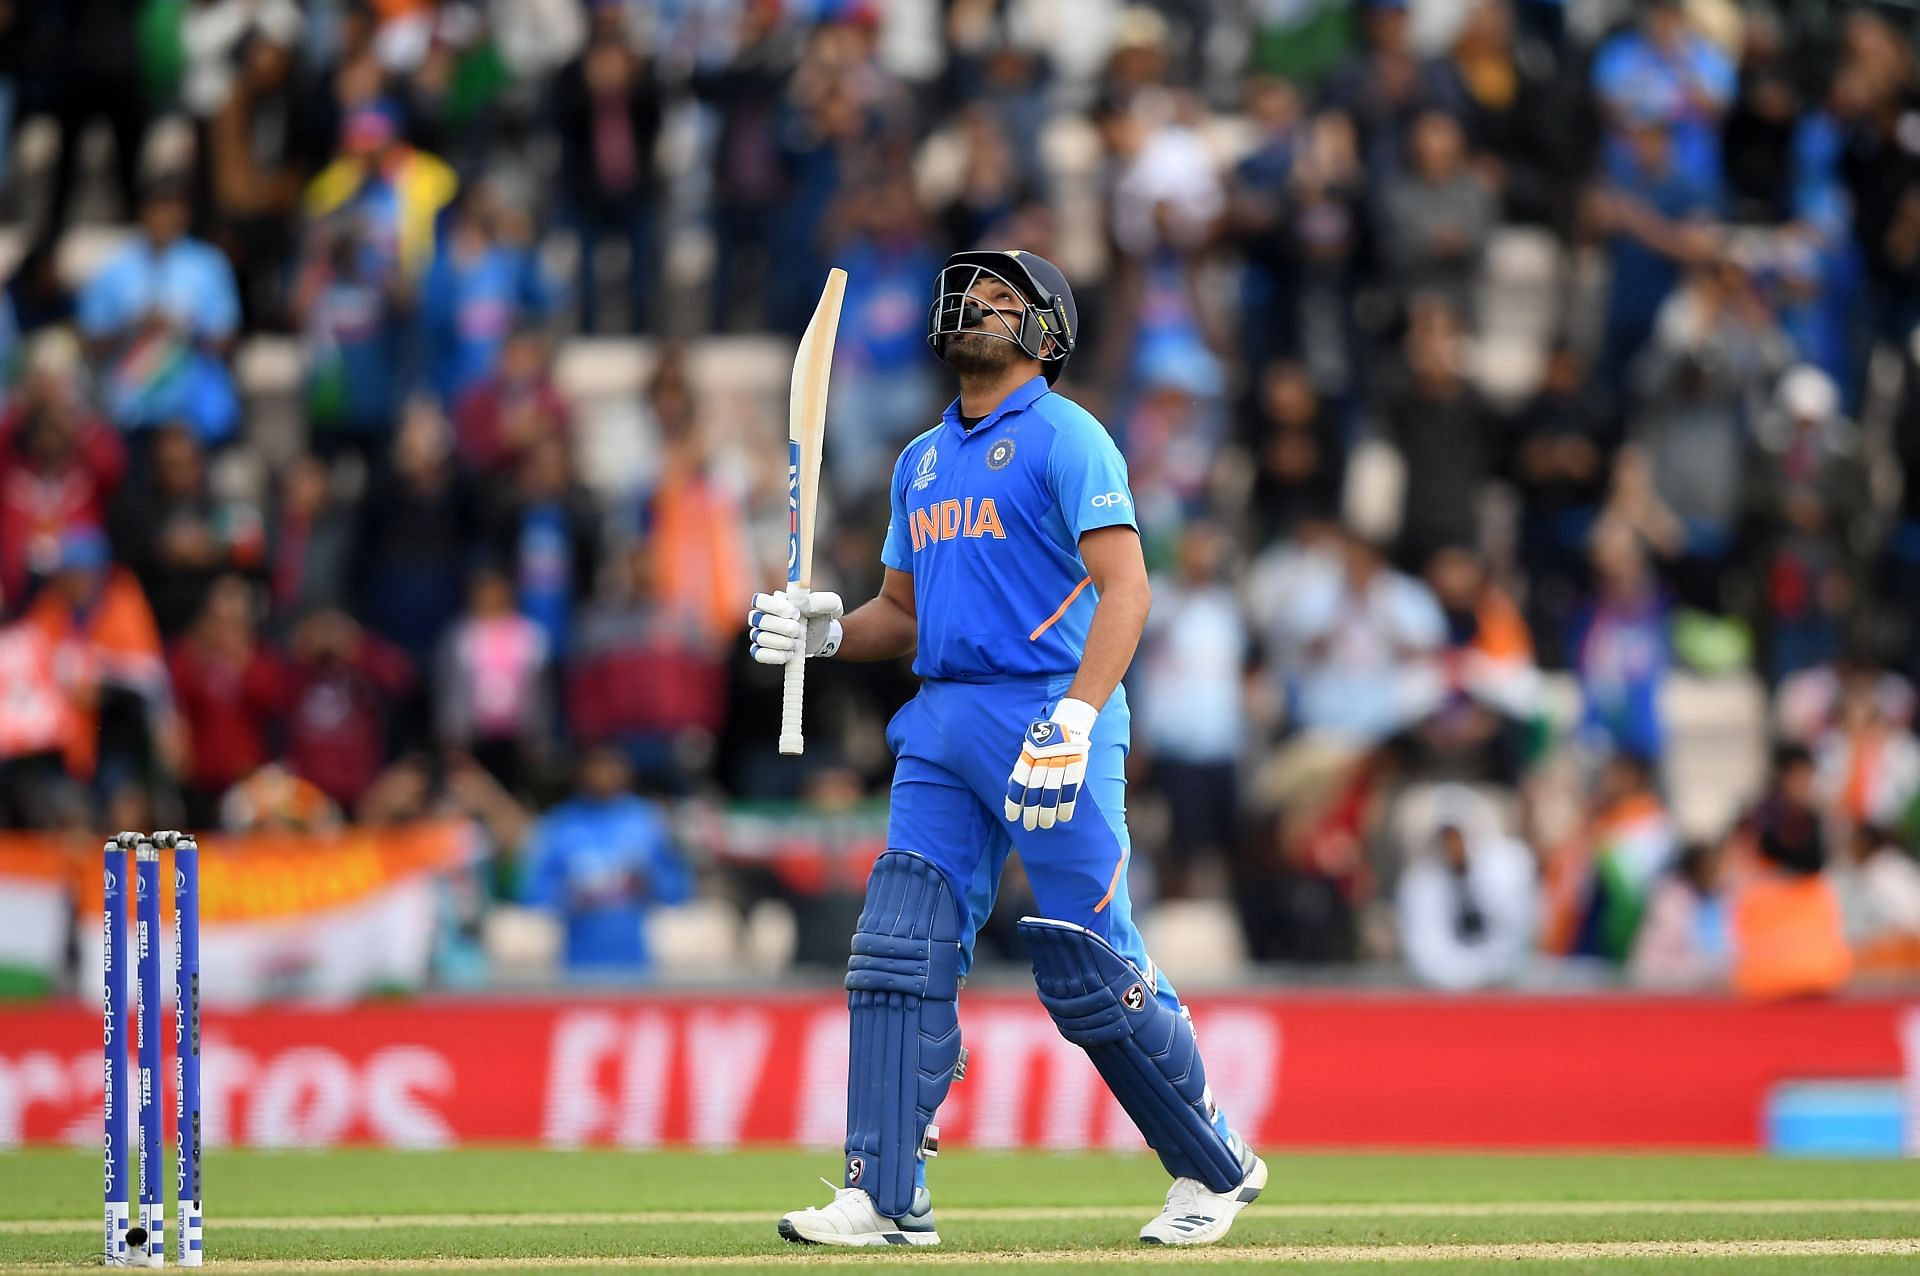 Rohit Sharma has been one of the modern-day greats in the ODI format